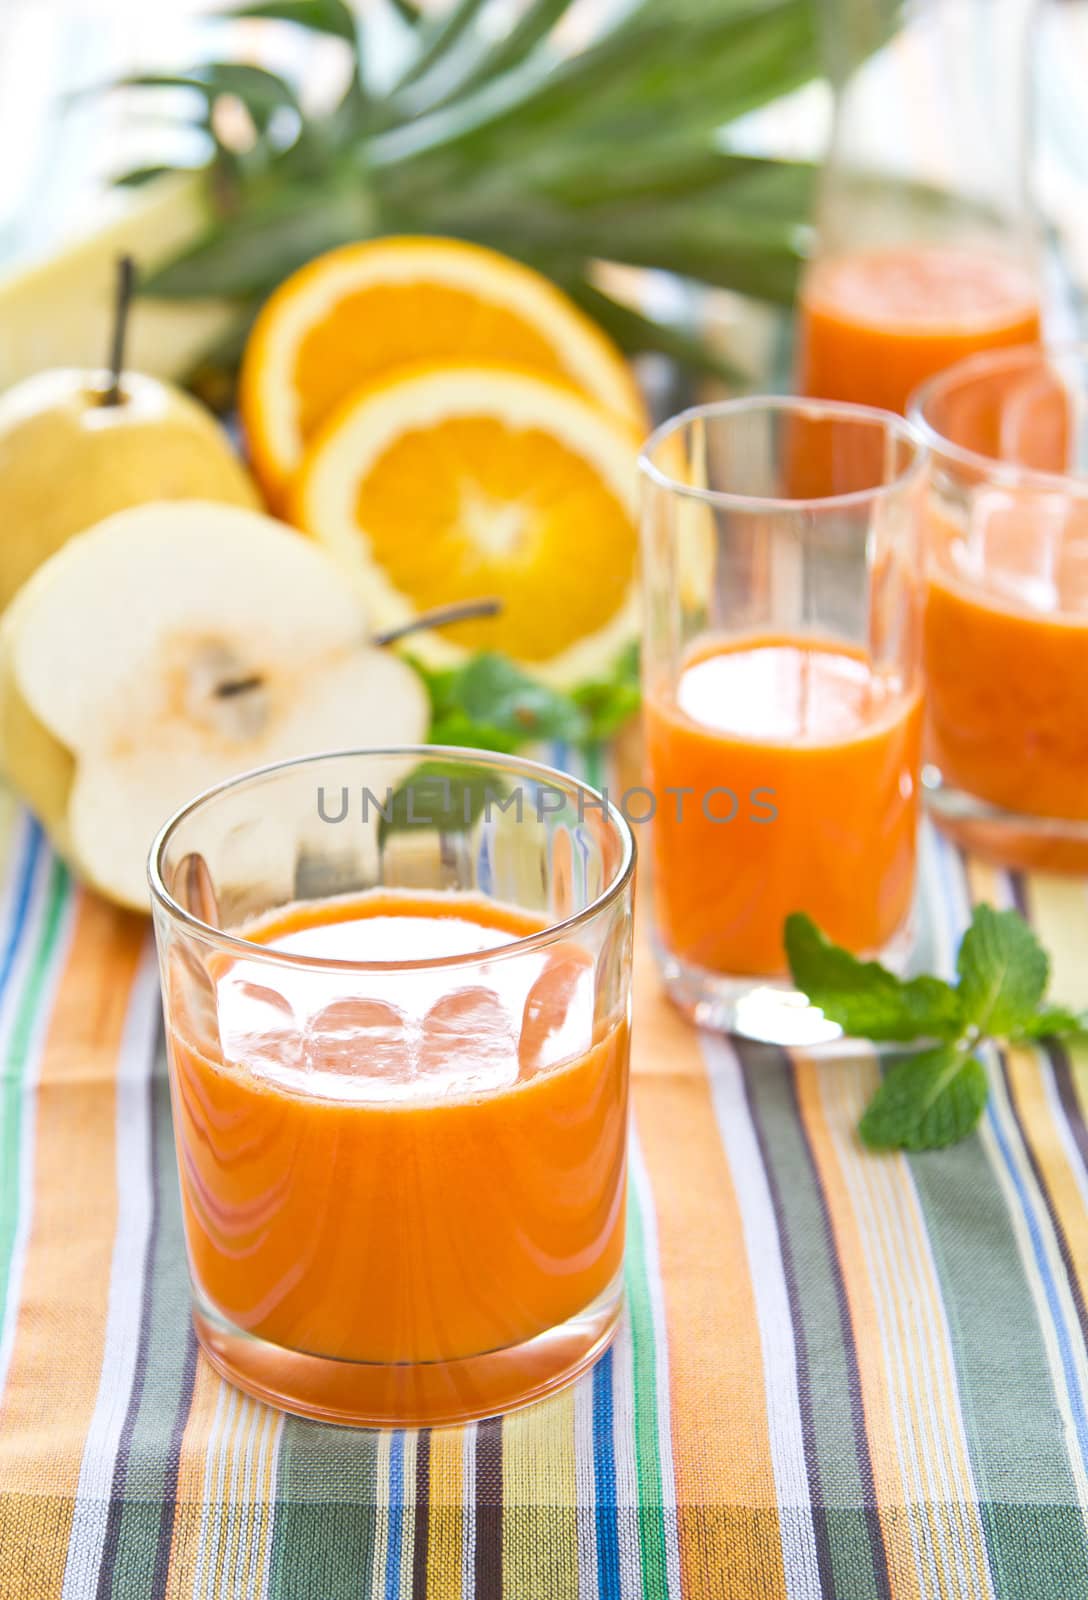 Pear,Orange,Carrot and Pineapple smoothie